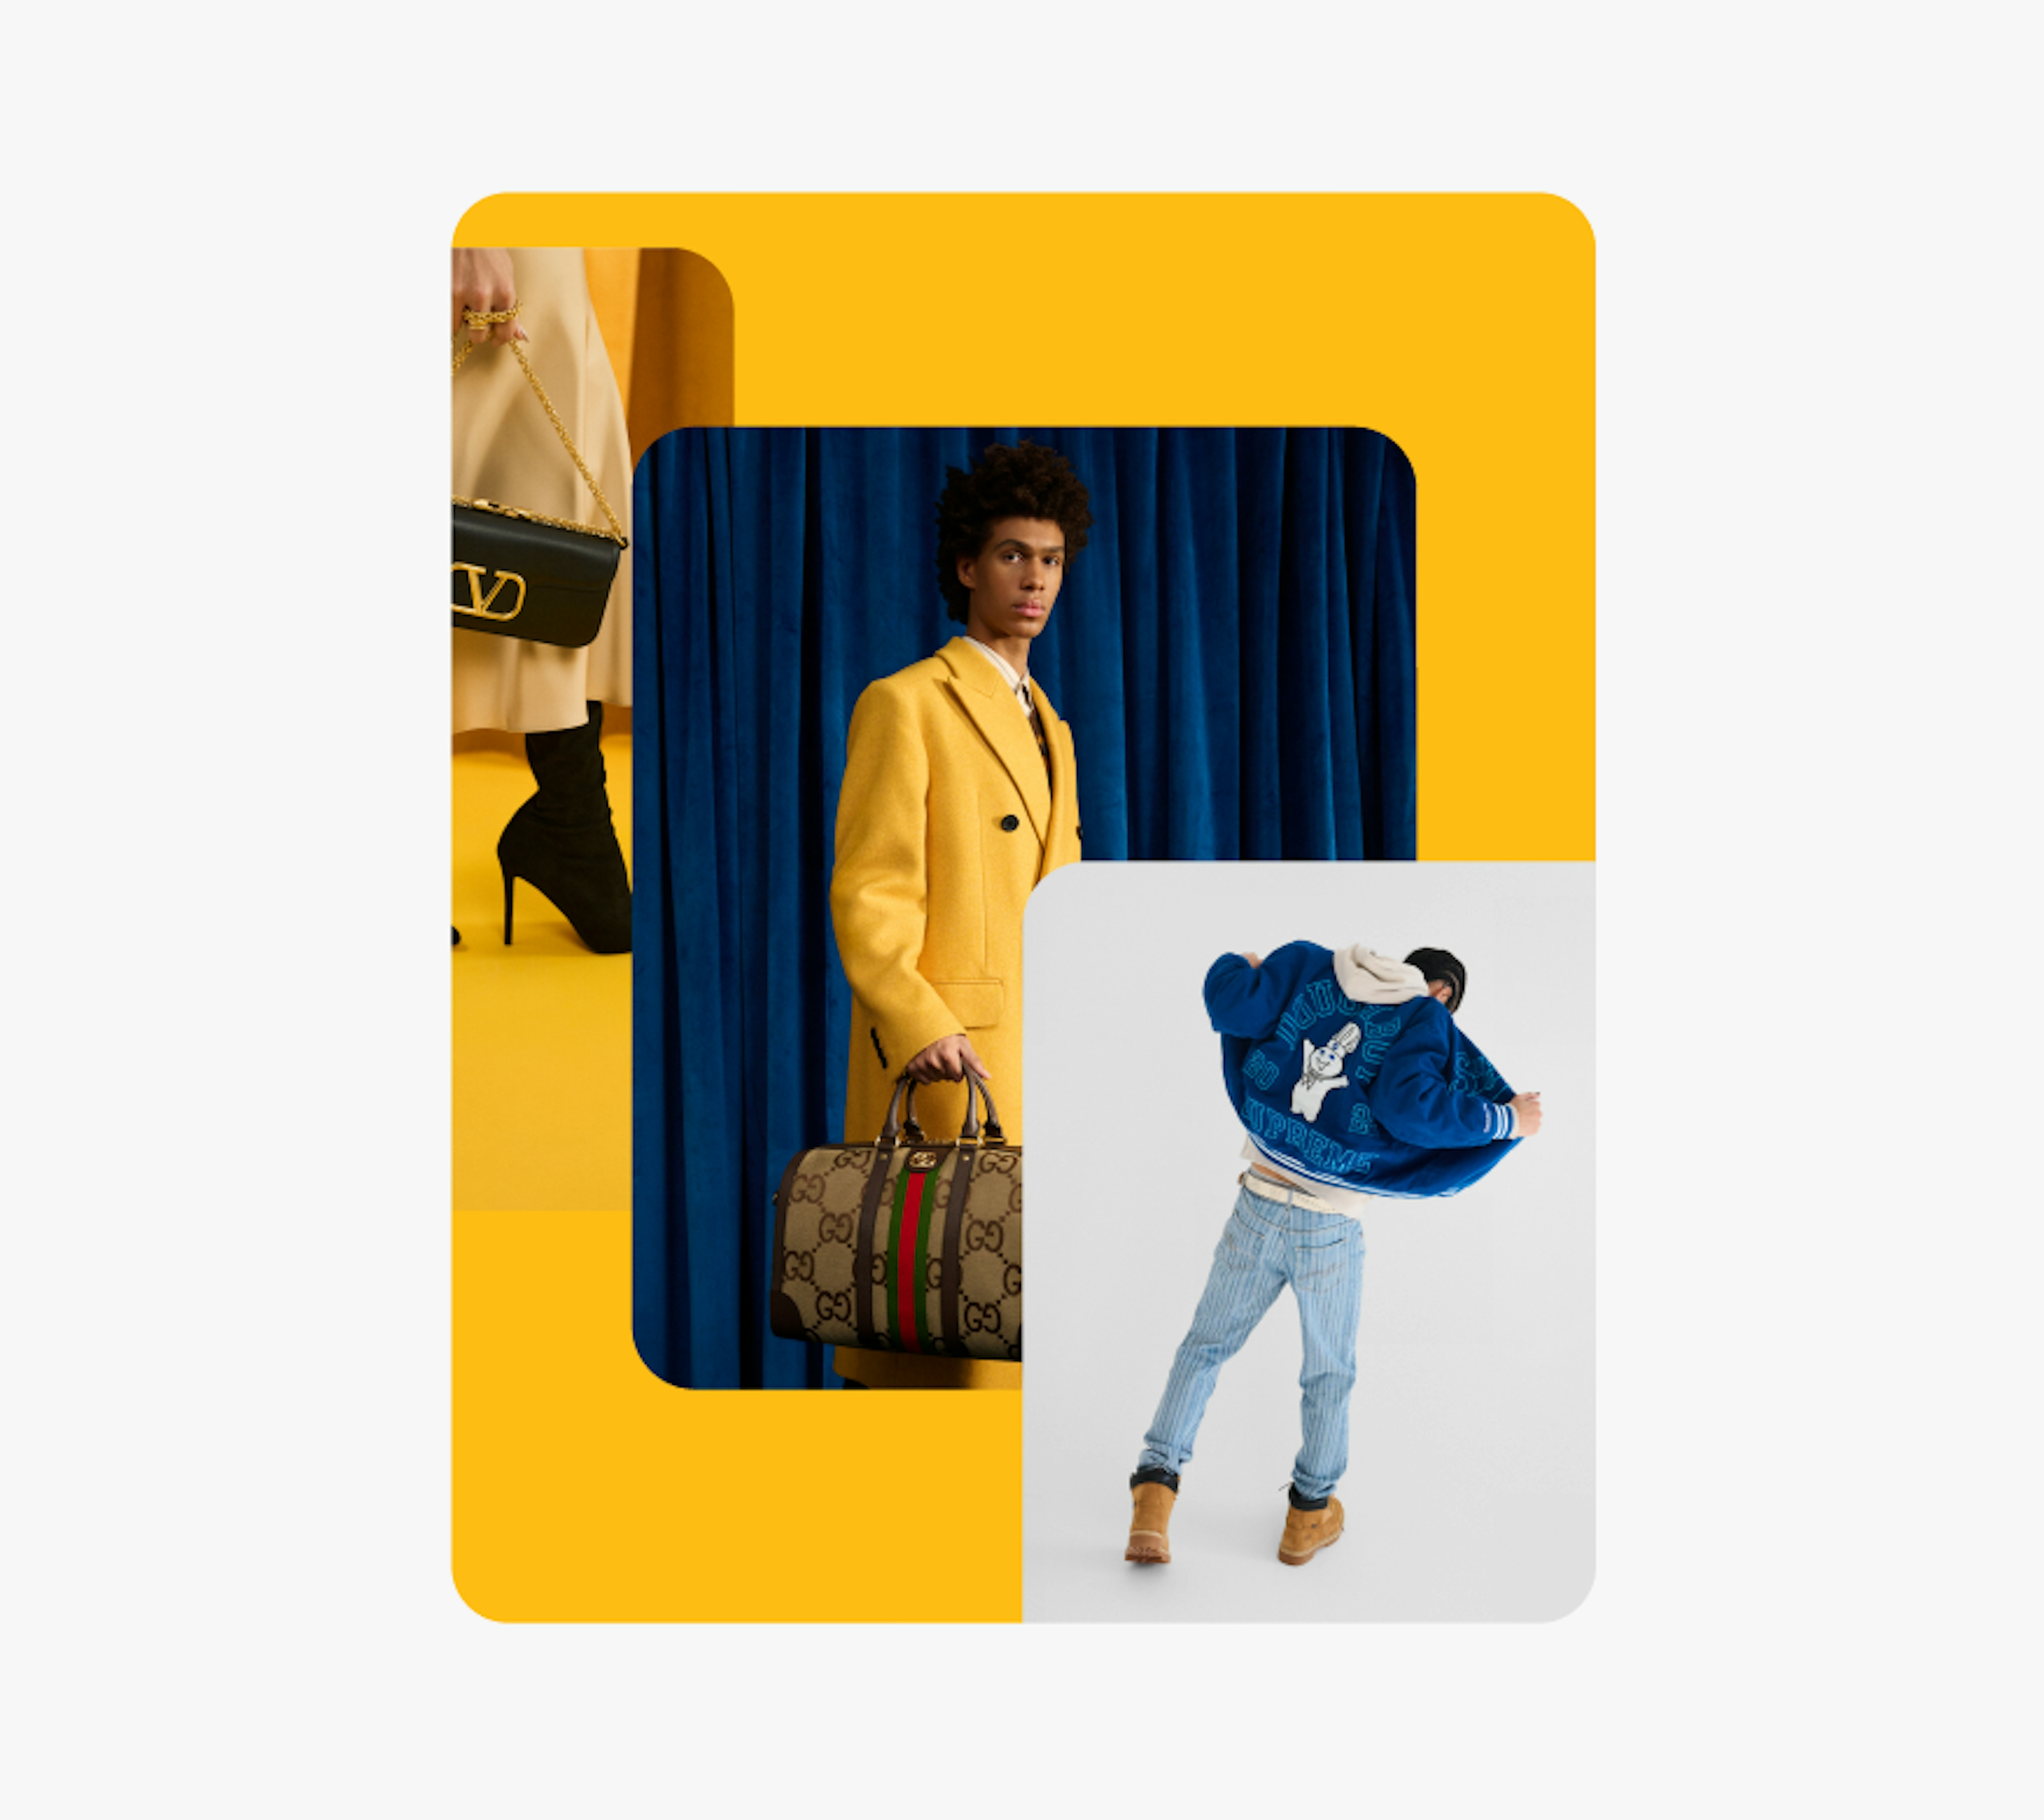 A collage featuring a stylish individual in a yellow coat holding a Gucci bag, another person with their back turned wearing a blue Supreme jacket with graphic text, and a close-up of a woman holding a black Valentino purse.